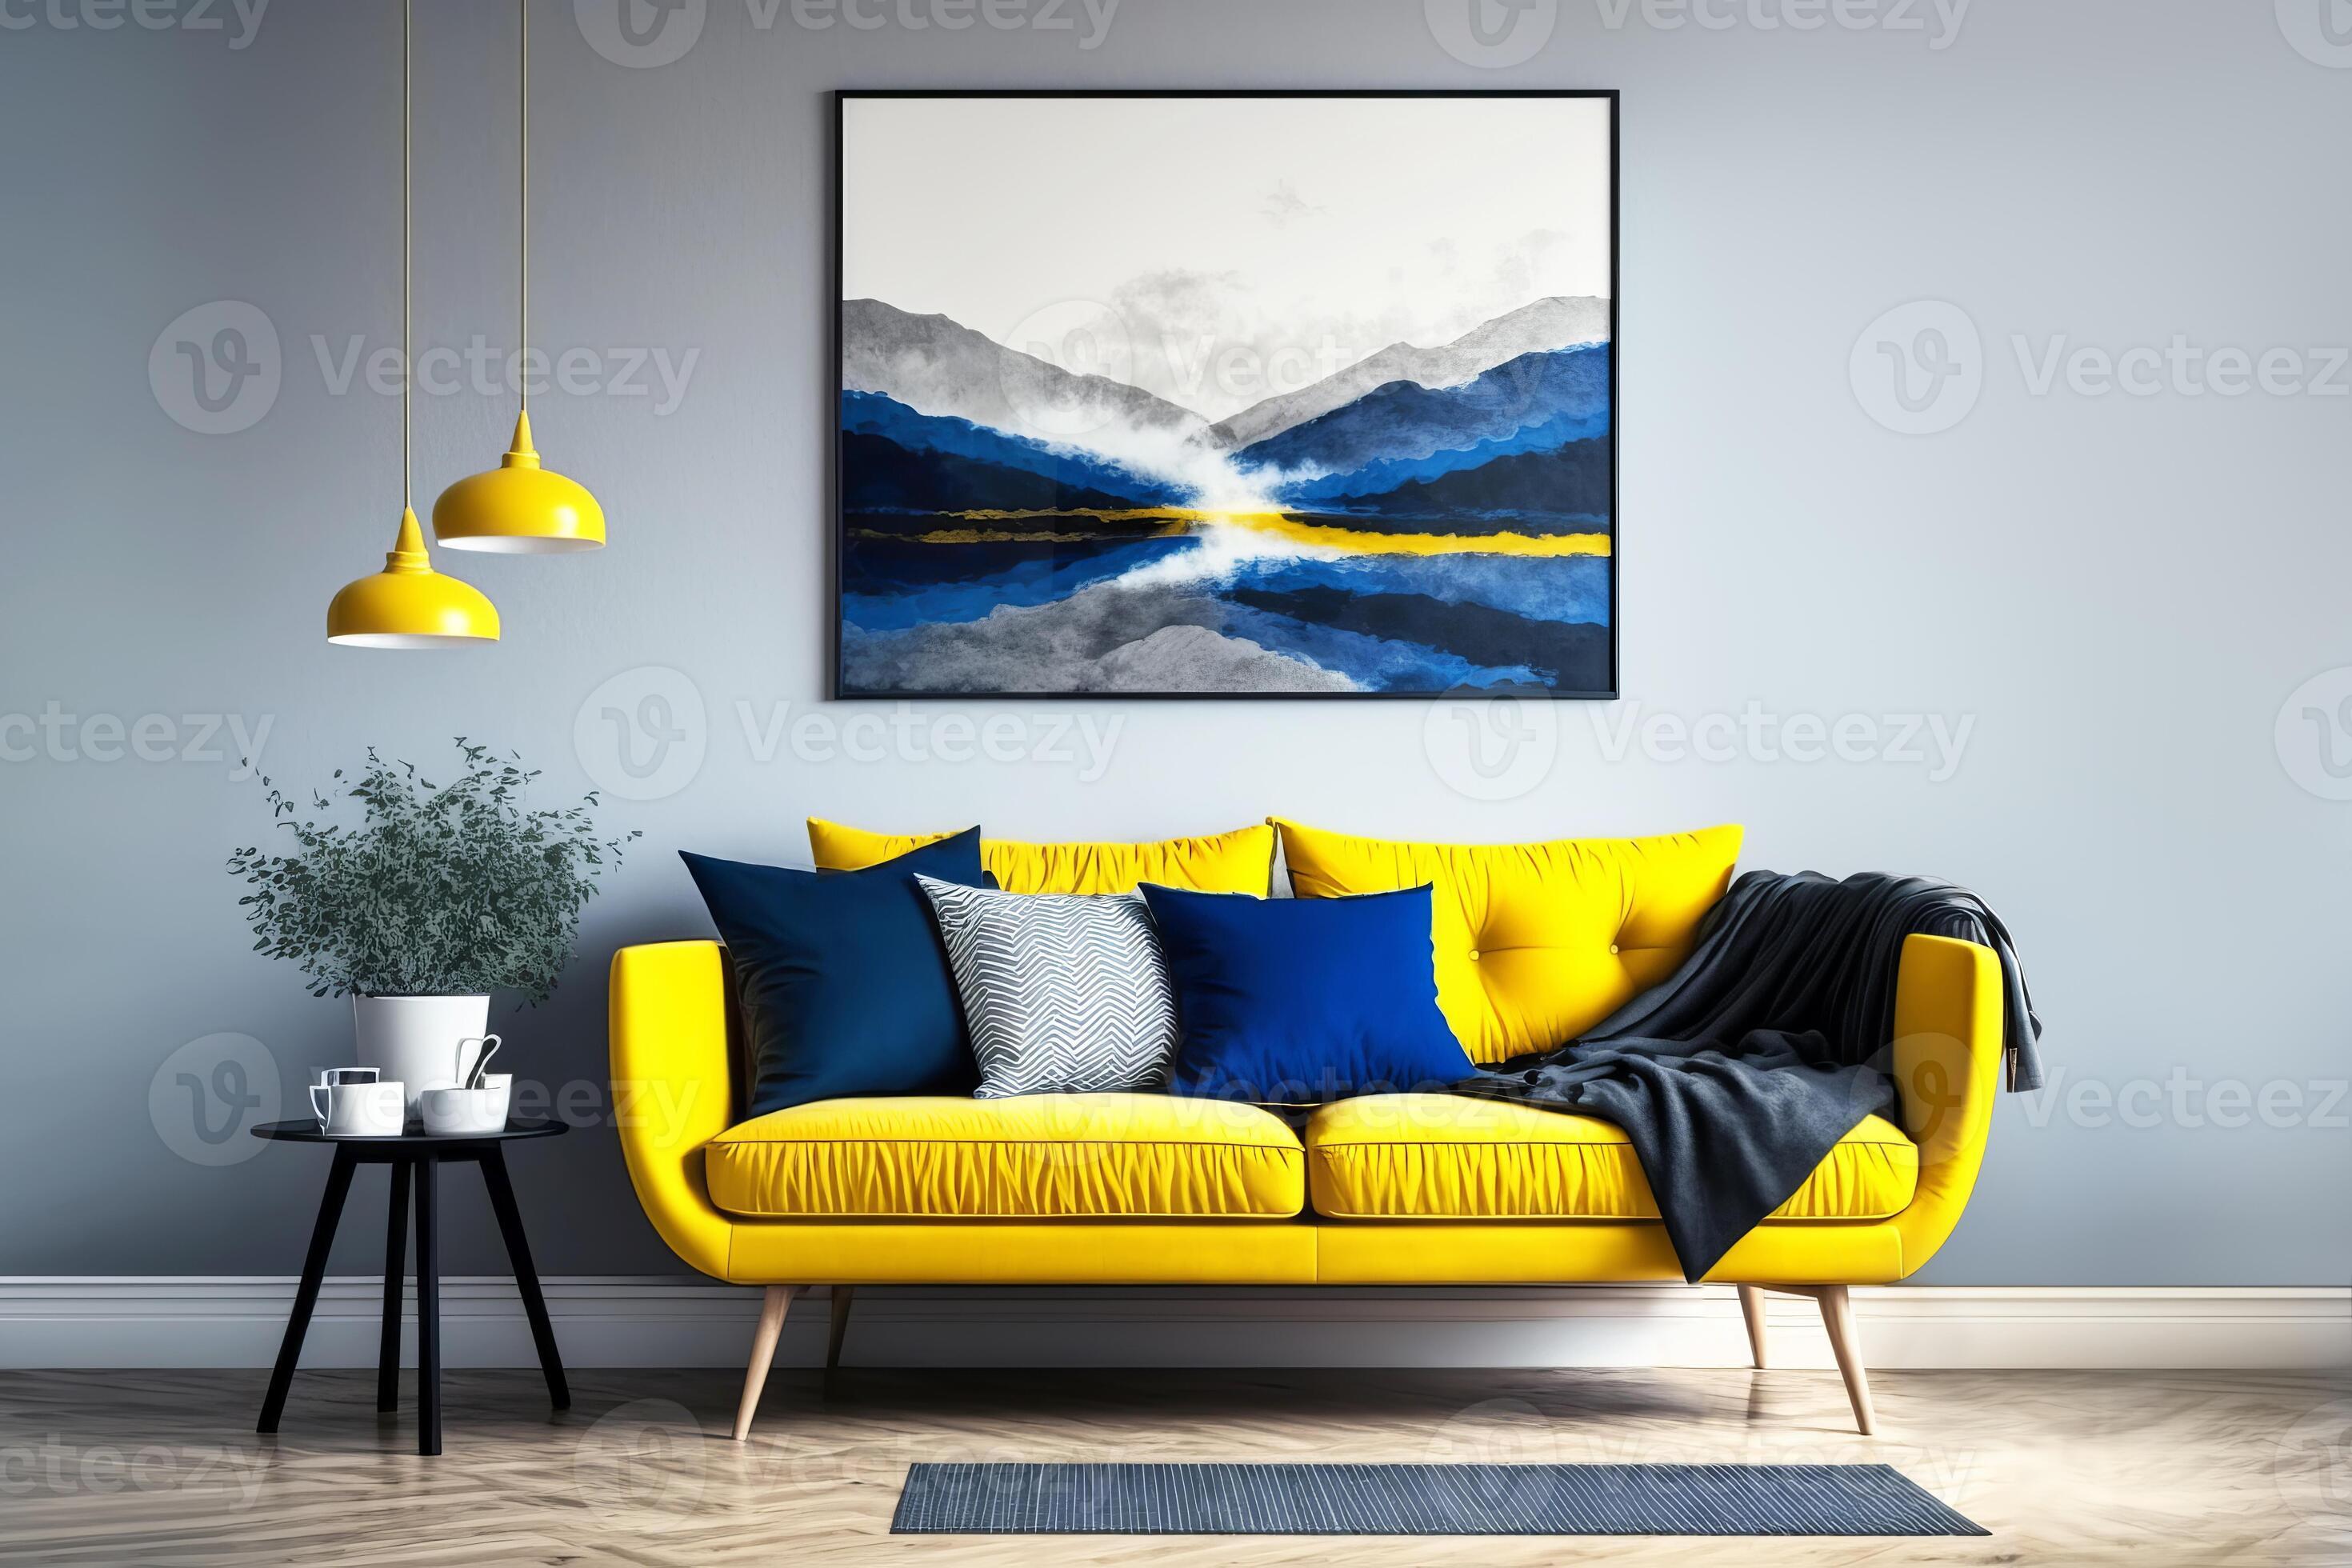 Modern living room interior with yellow sofa and blue accessories ...